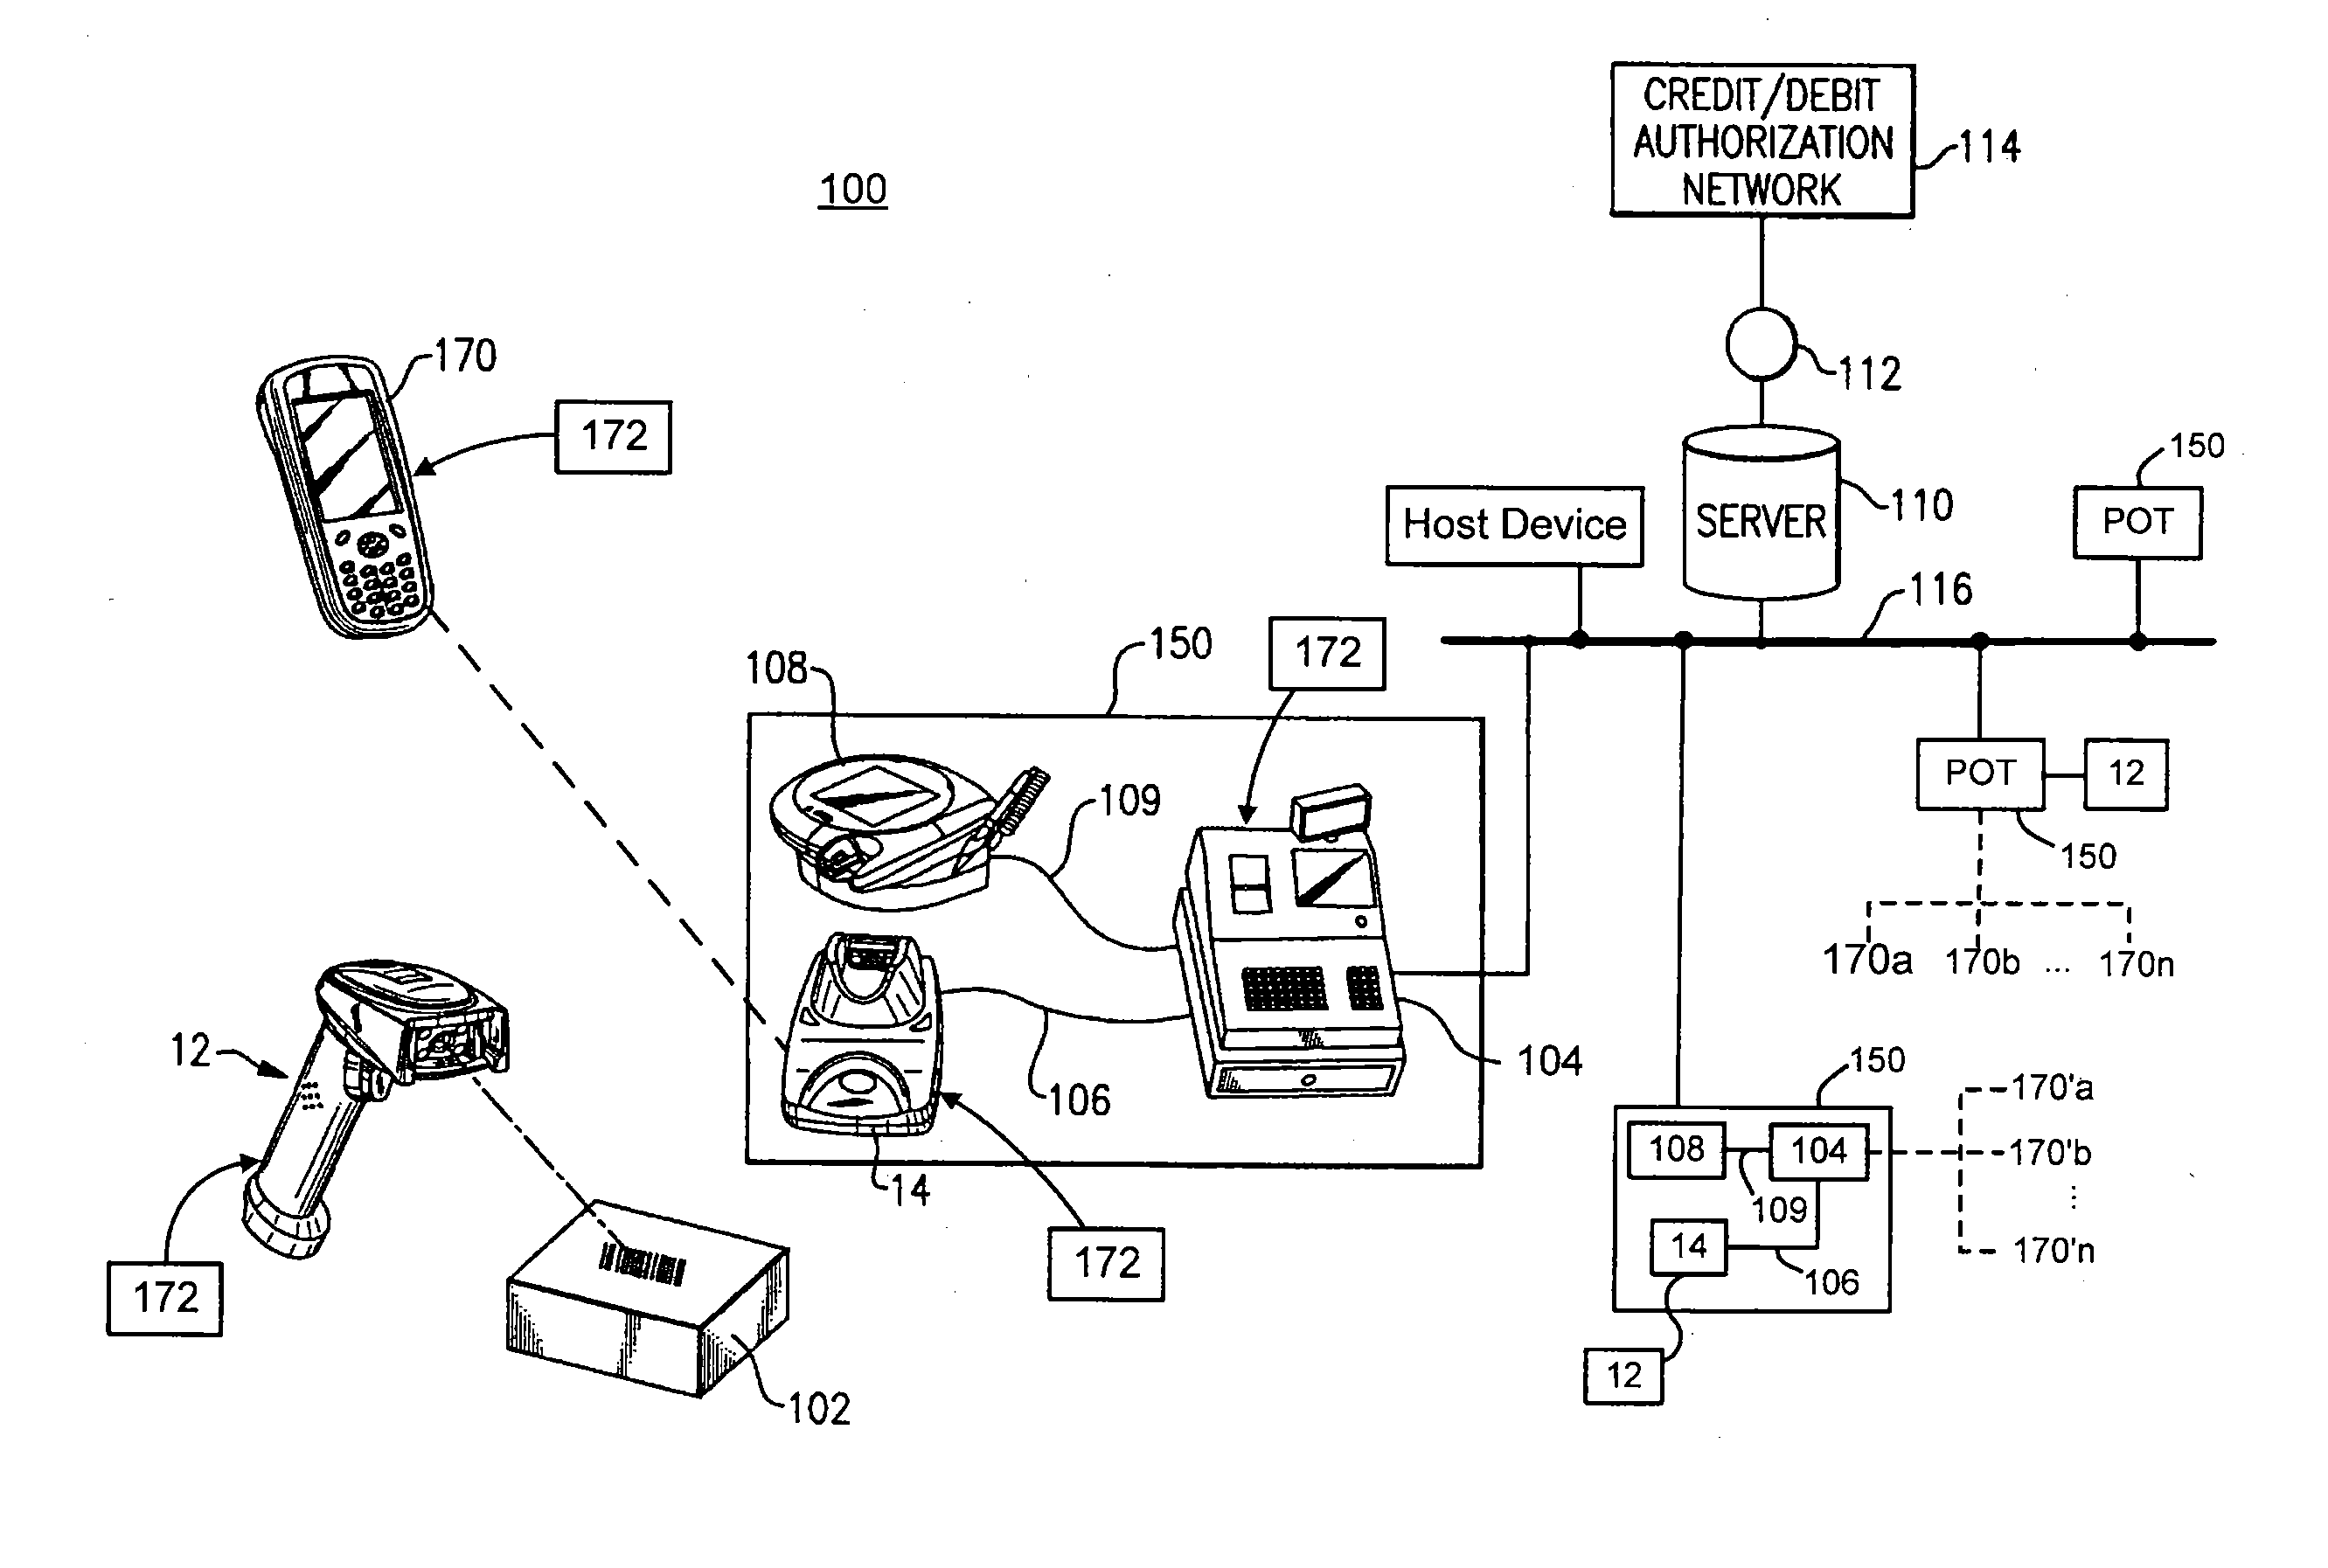 Mobile device discovery and information distribution system for an indicia reader system at retail establishment